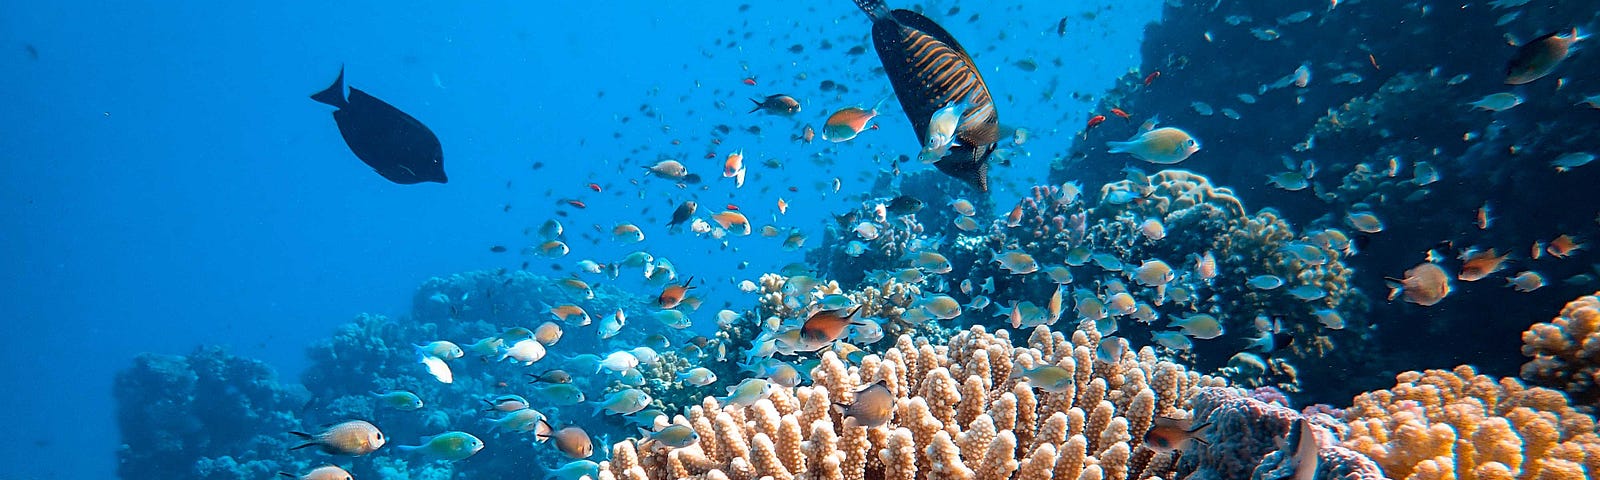 A coral reef with dozens of small ocean fish swimming near the surface of the coral.